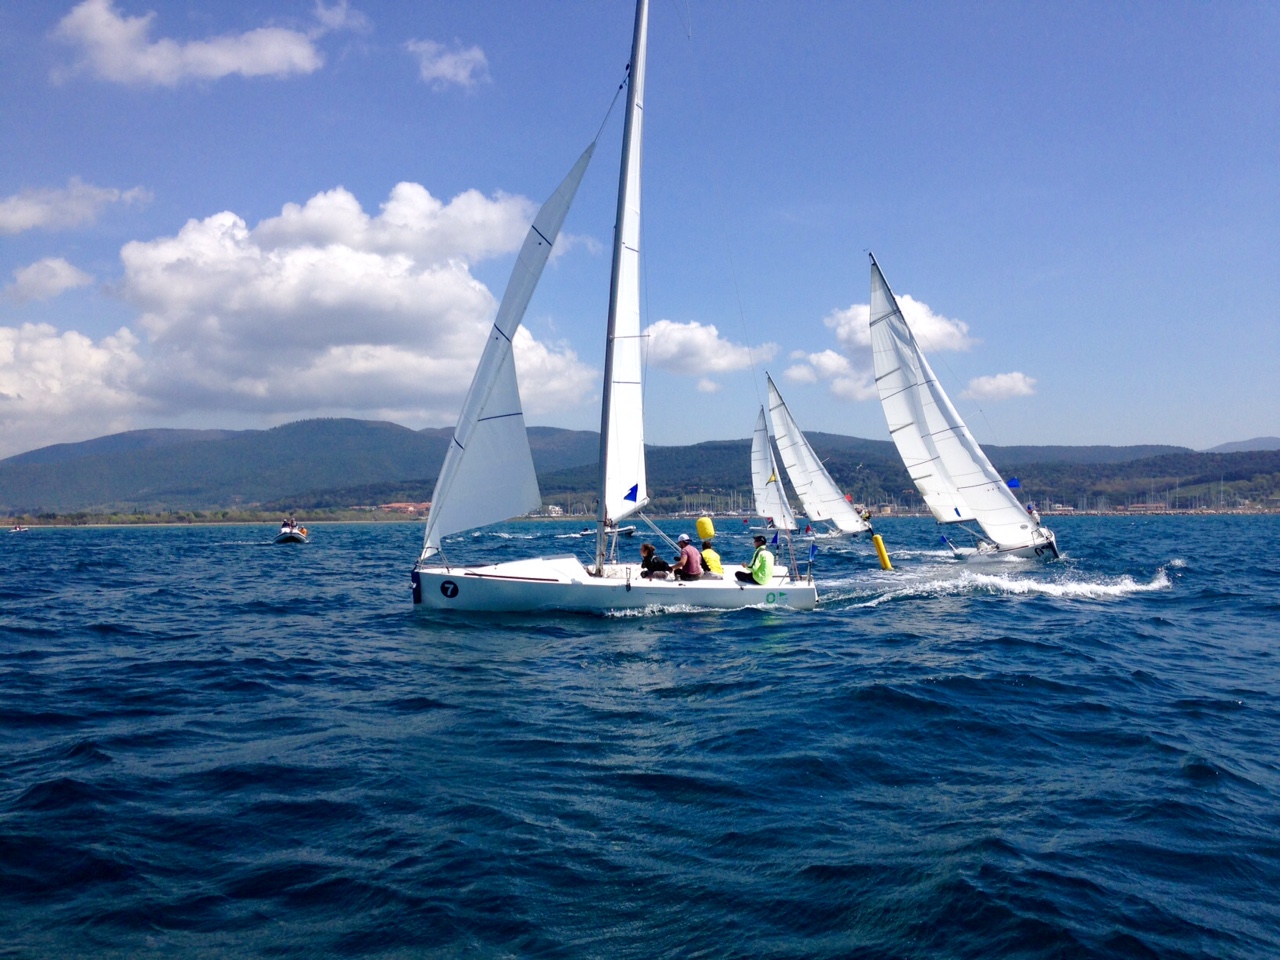 YCCS IN SECOND PLACE AFTER DAY 1 OF SCARLINO 2K RACING - NEWS - Yacht Club Costa Smeralda